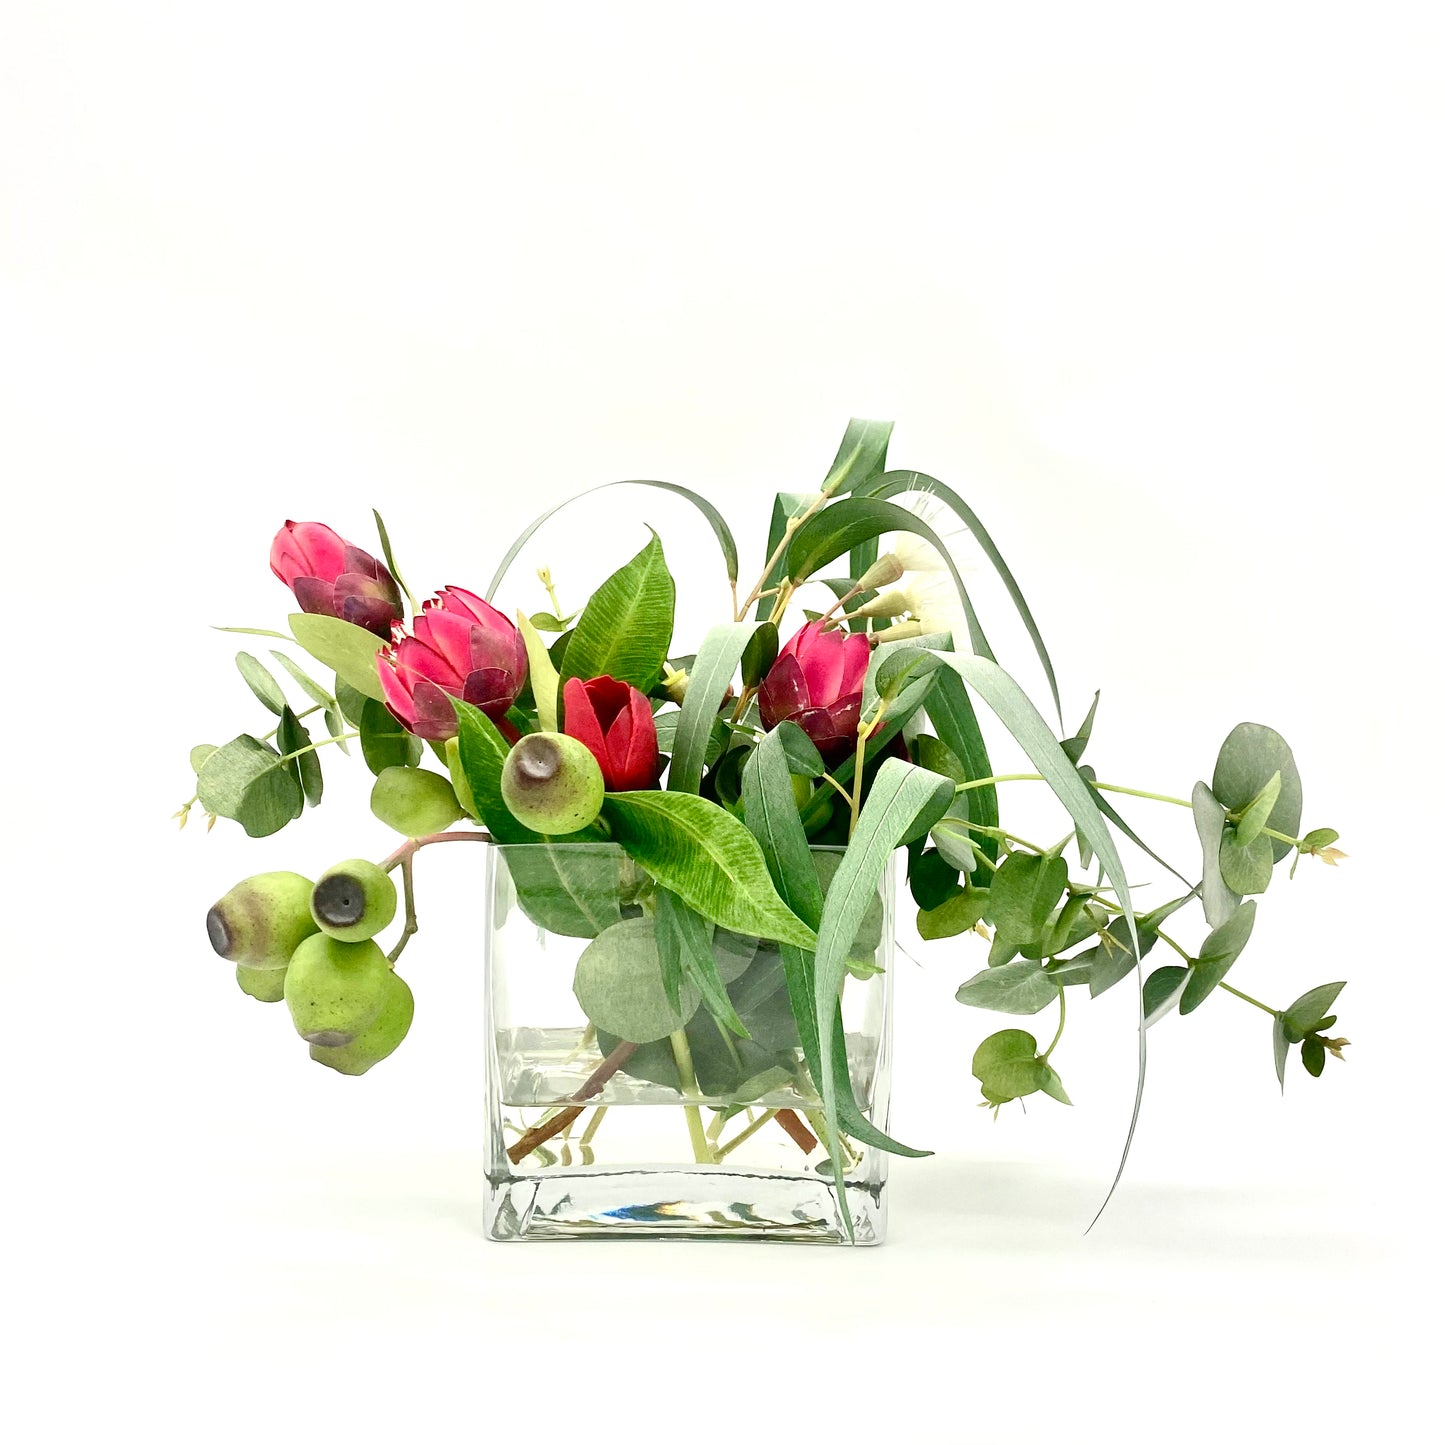 The Protea and Native One: A Fresh and Crisp Native Arrangement with a Pop of Red